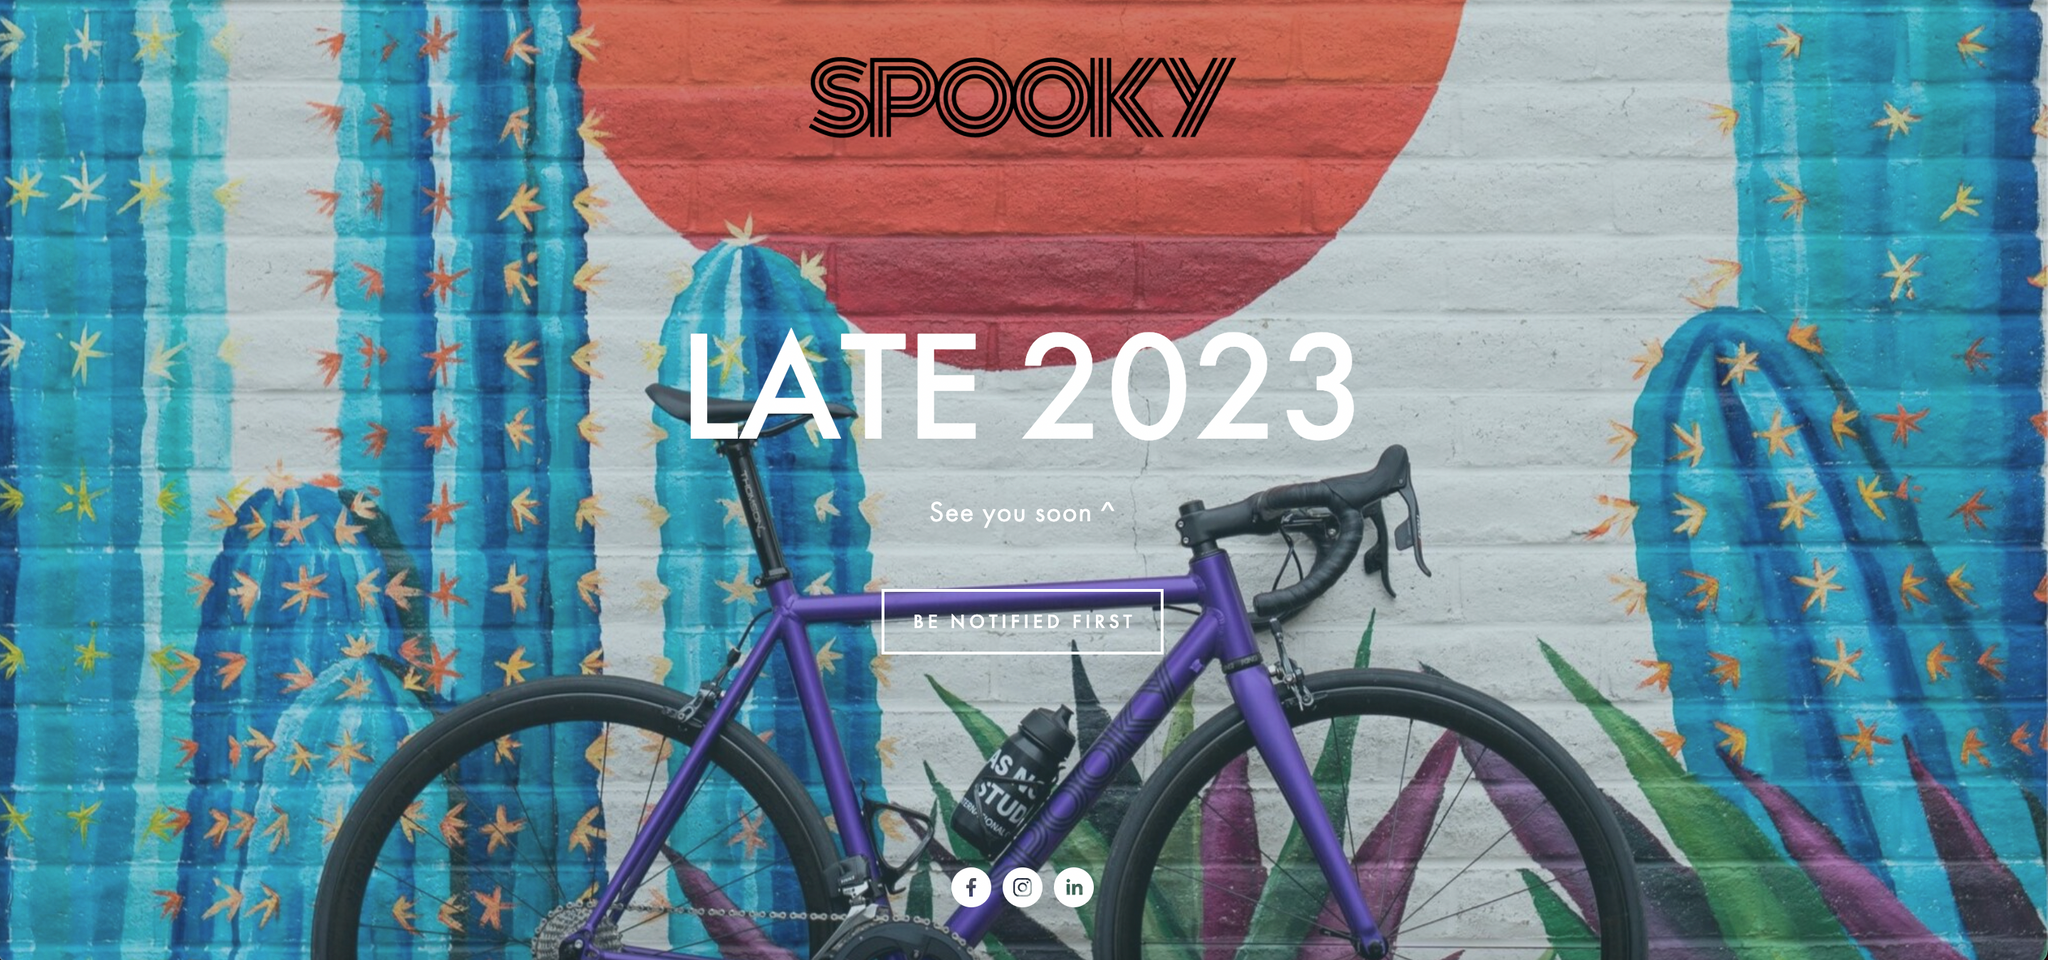 Is Spooky bikes out of business?